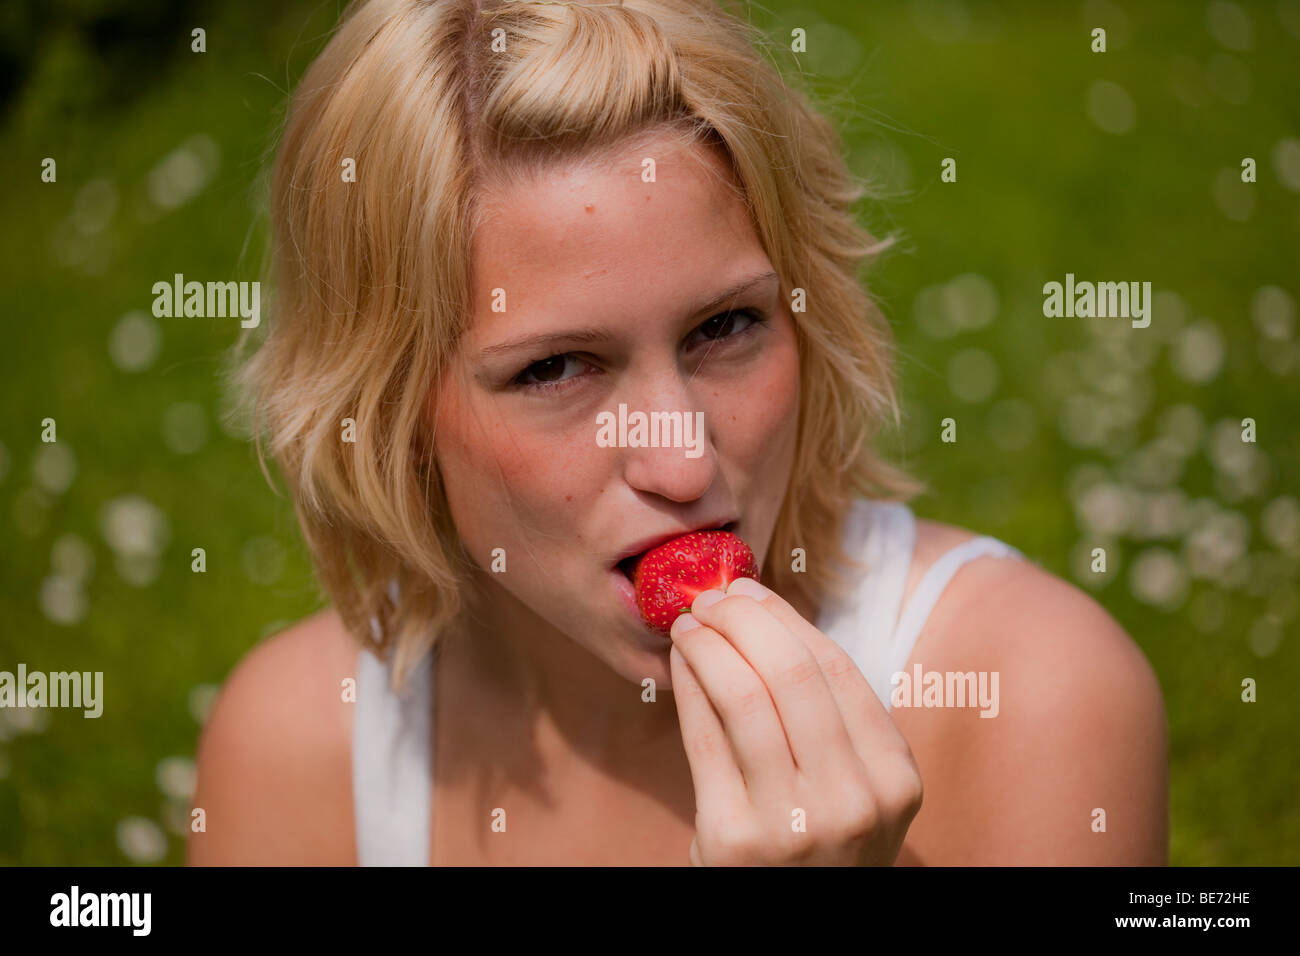 Young girl eating a strawberry Stock Photo